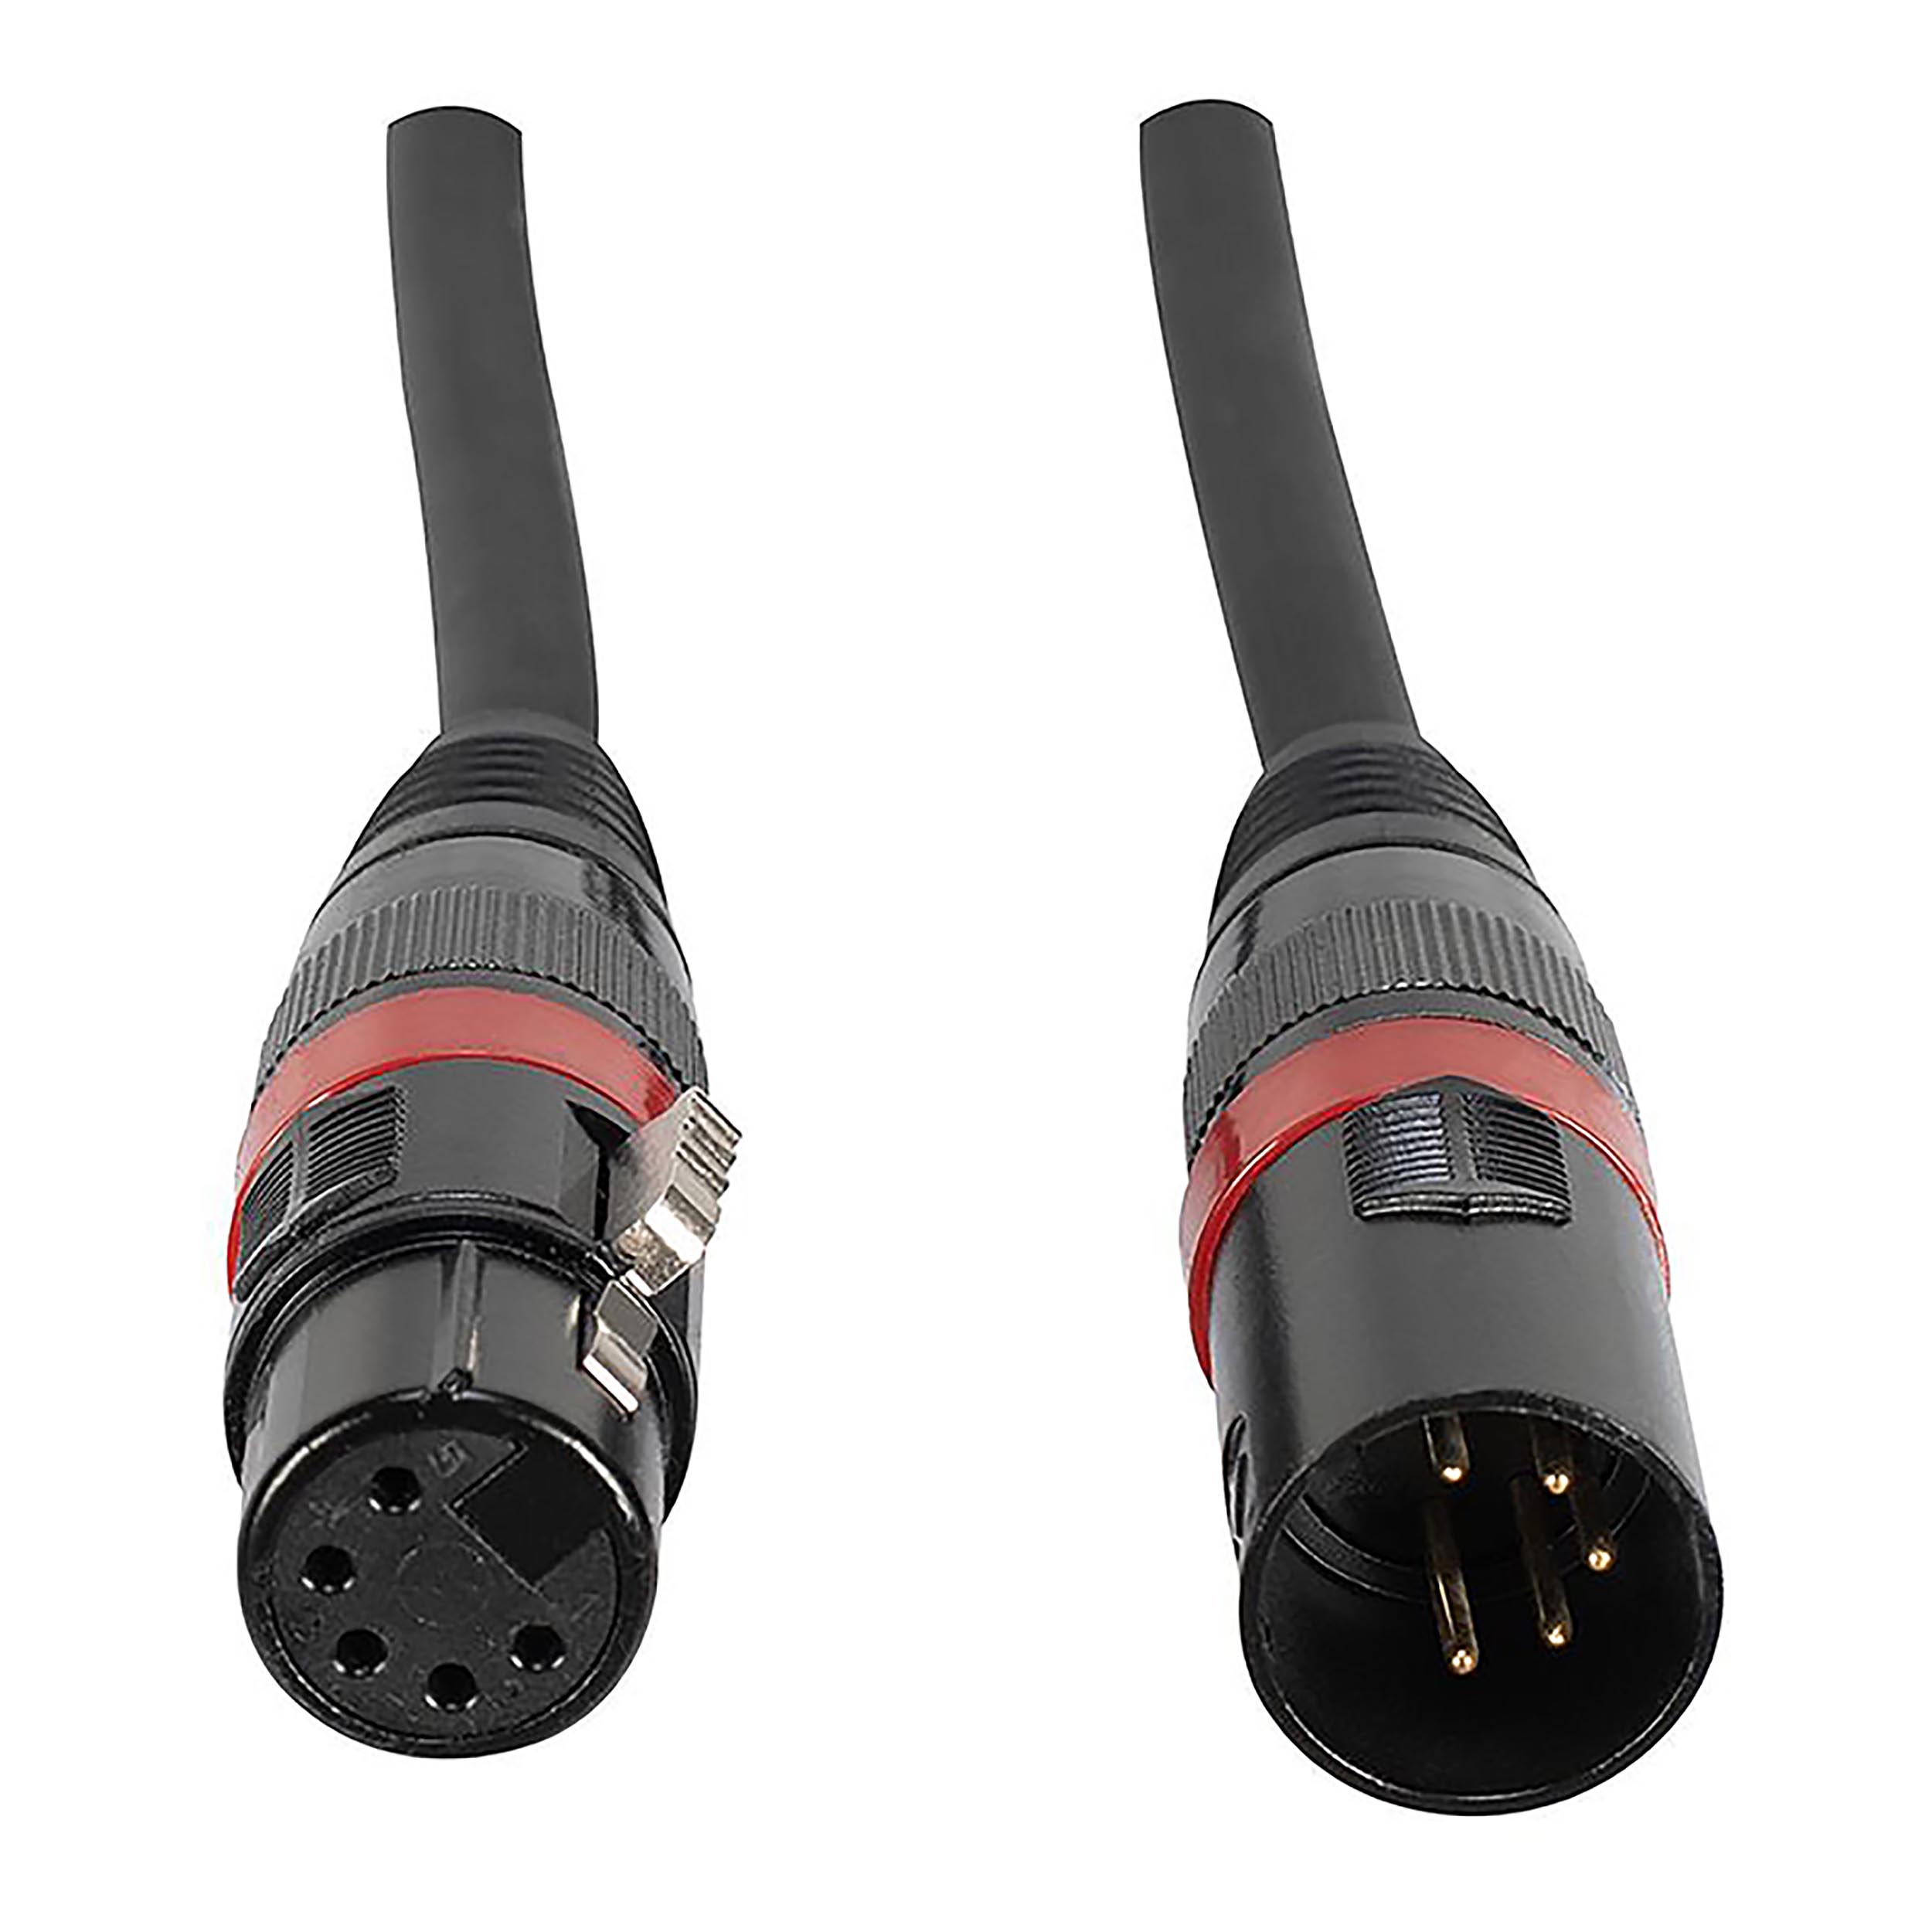 Accu-Cable AC5PDMX5, 5-Pin Male To 5-Pin Female Connection DMX Cable - 5 Ft by Accu Cable